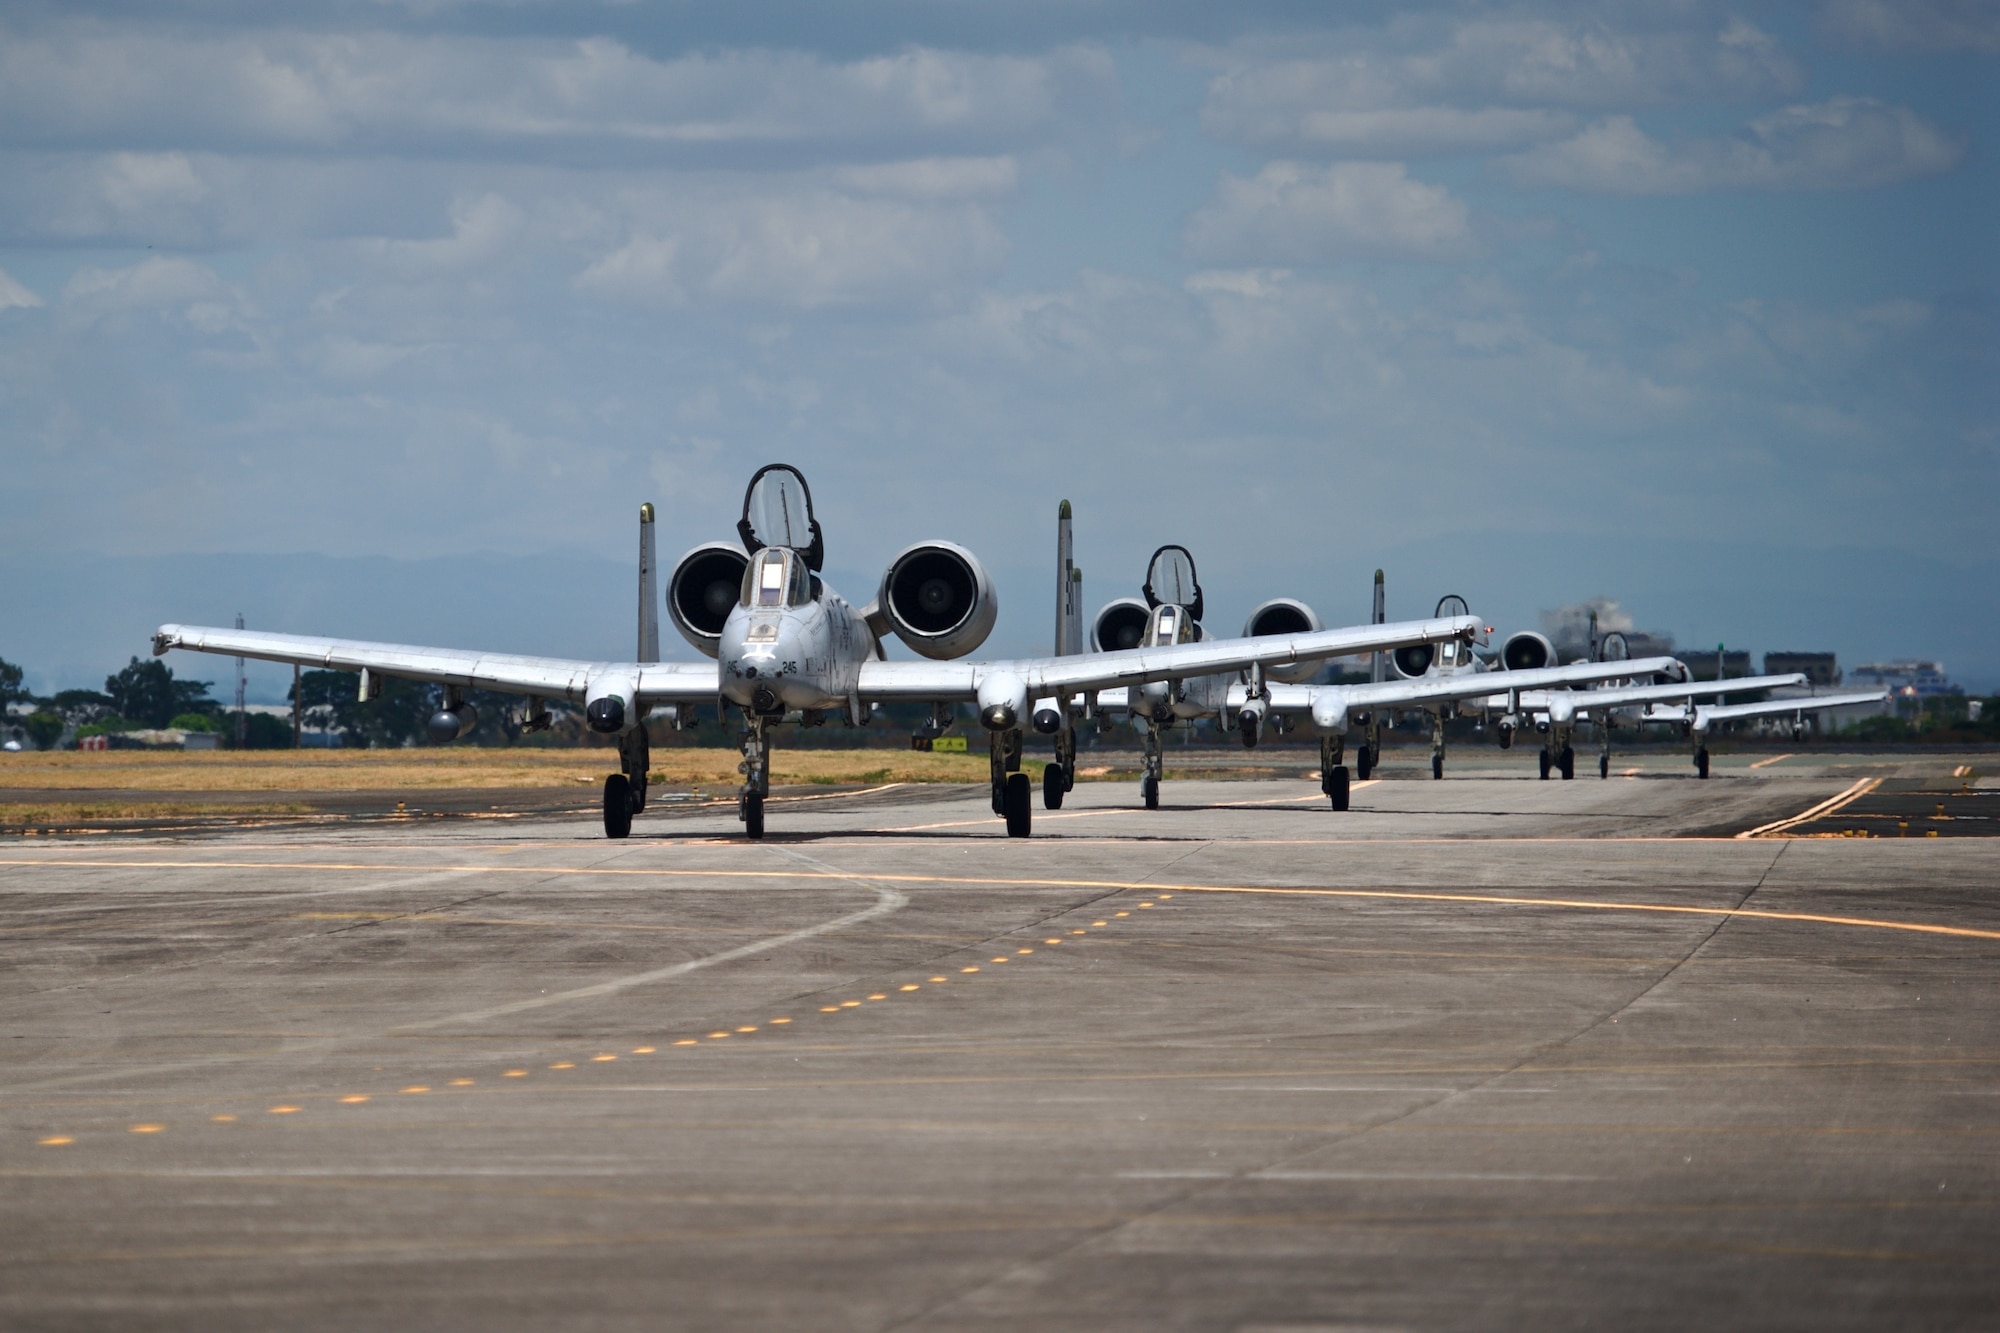 Four U.S. Air Force A-10C Thunderbolt II aircraft taxi down the runway at Clark Air Base, Philippines, after completing an air and maritime domain awareness mission in the vicinity of Scarborough Shoal April 21, 2016. These aircraft are part of U.S. Pacific Command’s l Air Contingent designed to promote interoperability and provide greater and more transparent air and maritime situational awareness to ensure safety for military and civilian activities in international waters and airspace. The AMDA missions the A-10C’s conduct enhances the ongoing maritime situational awareness missions that have been carried out by the U.S. Navy’s P-8 deployments to Clark for a number of years. (U.S. Air Force photo by Capt. Susan Harrington)